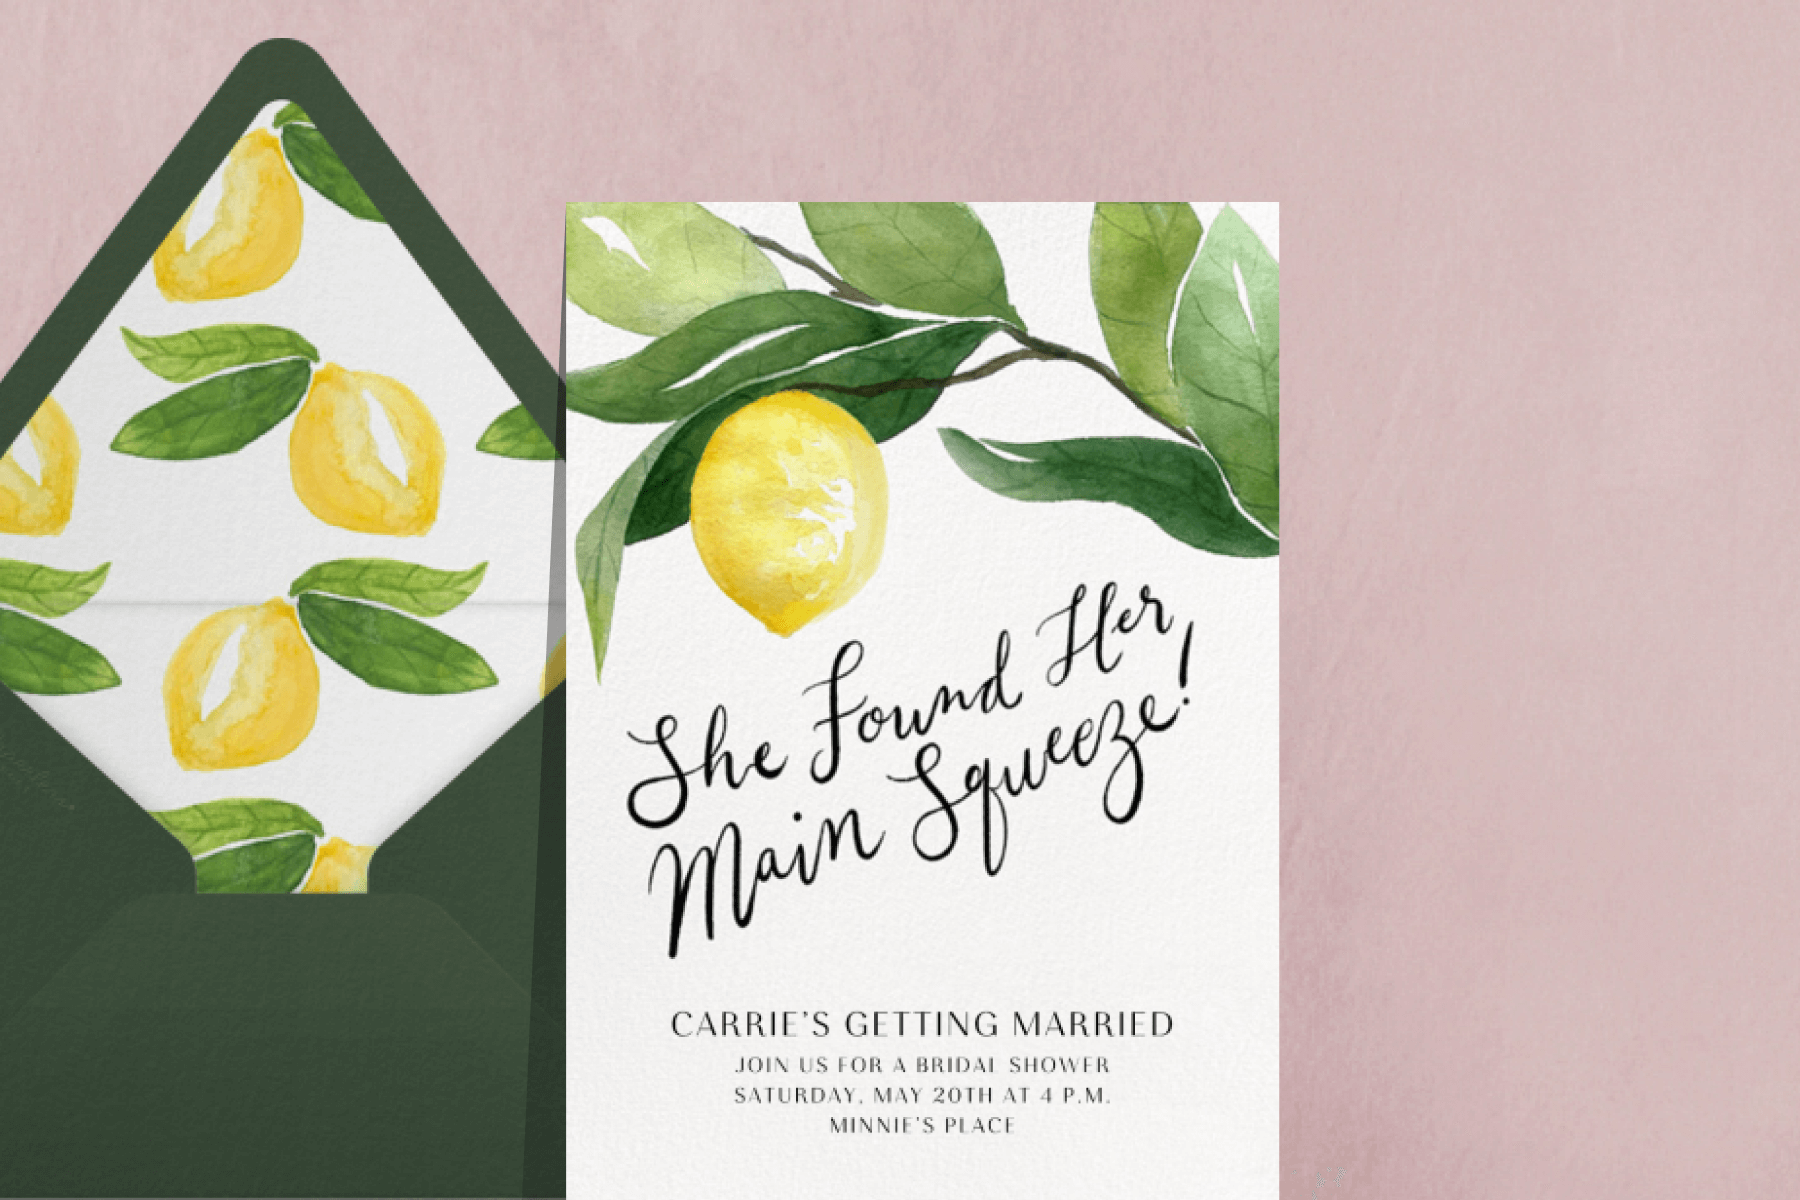 A bridal shower invitation featuring an illustration of a lemon on a branch.